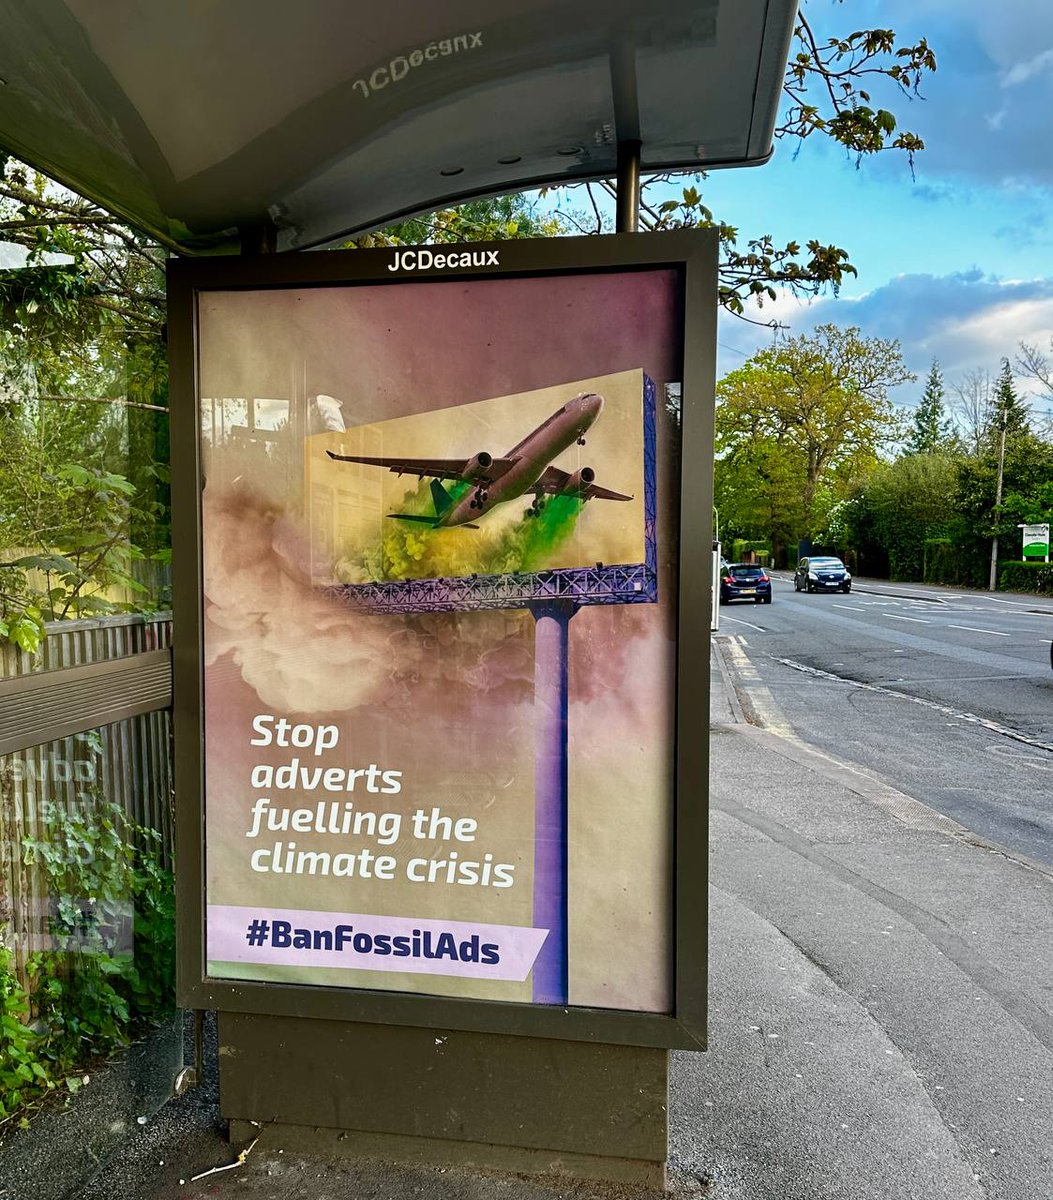 Seen to the west of London

Stop adverts fuelling the climate crisis

#StayGrounded
#Subvertising

campaigncc.org/nonewrunways